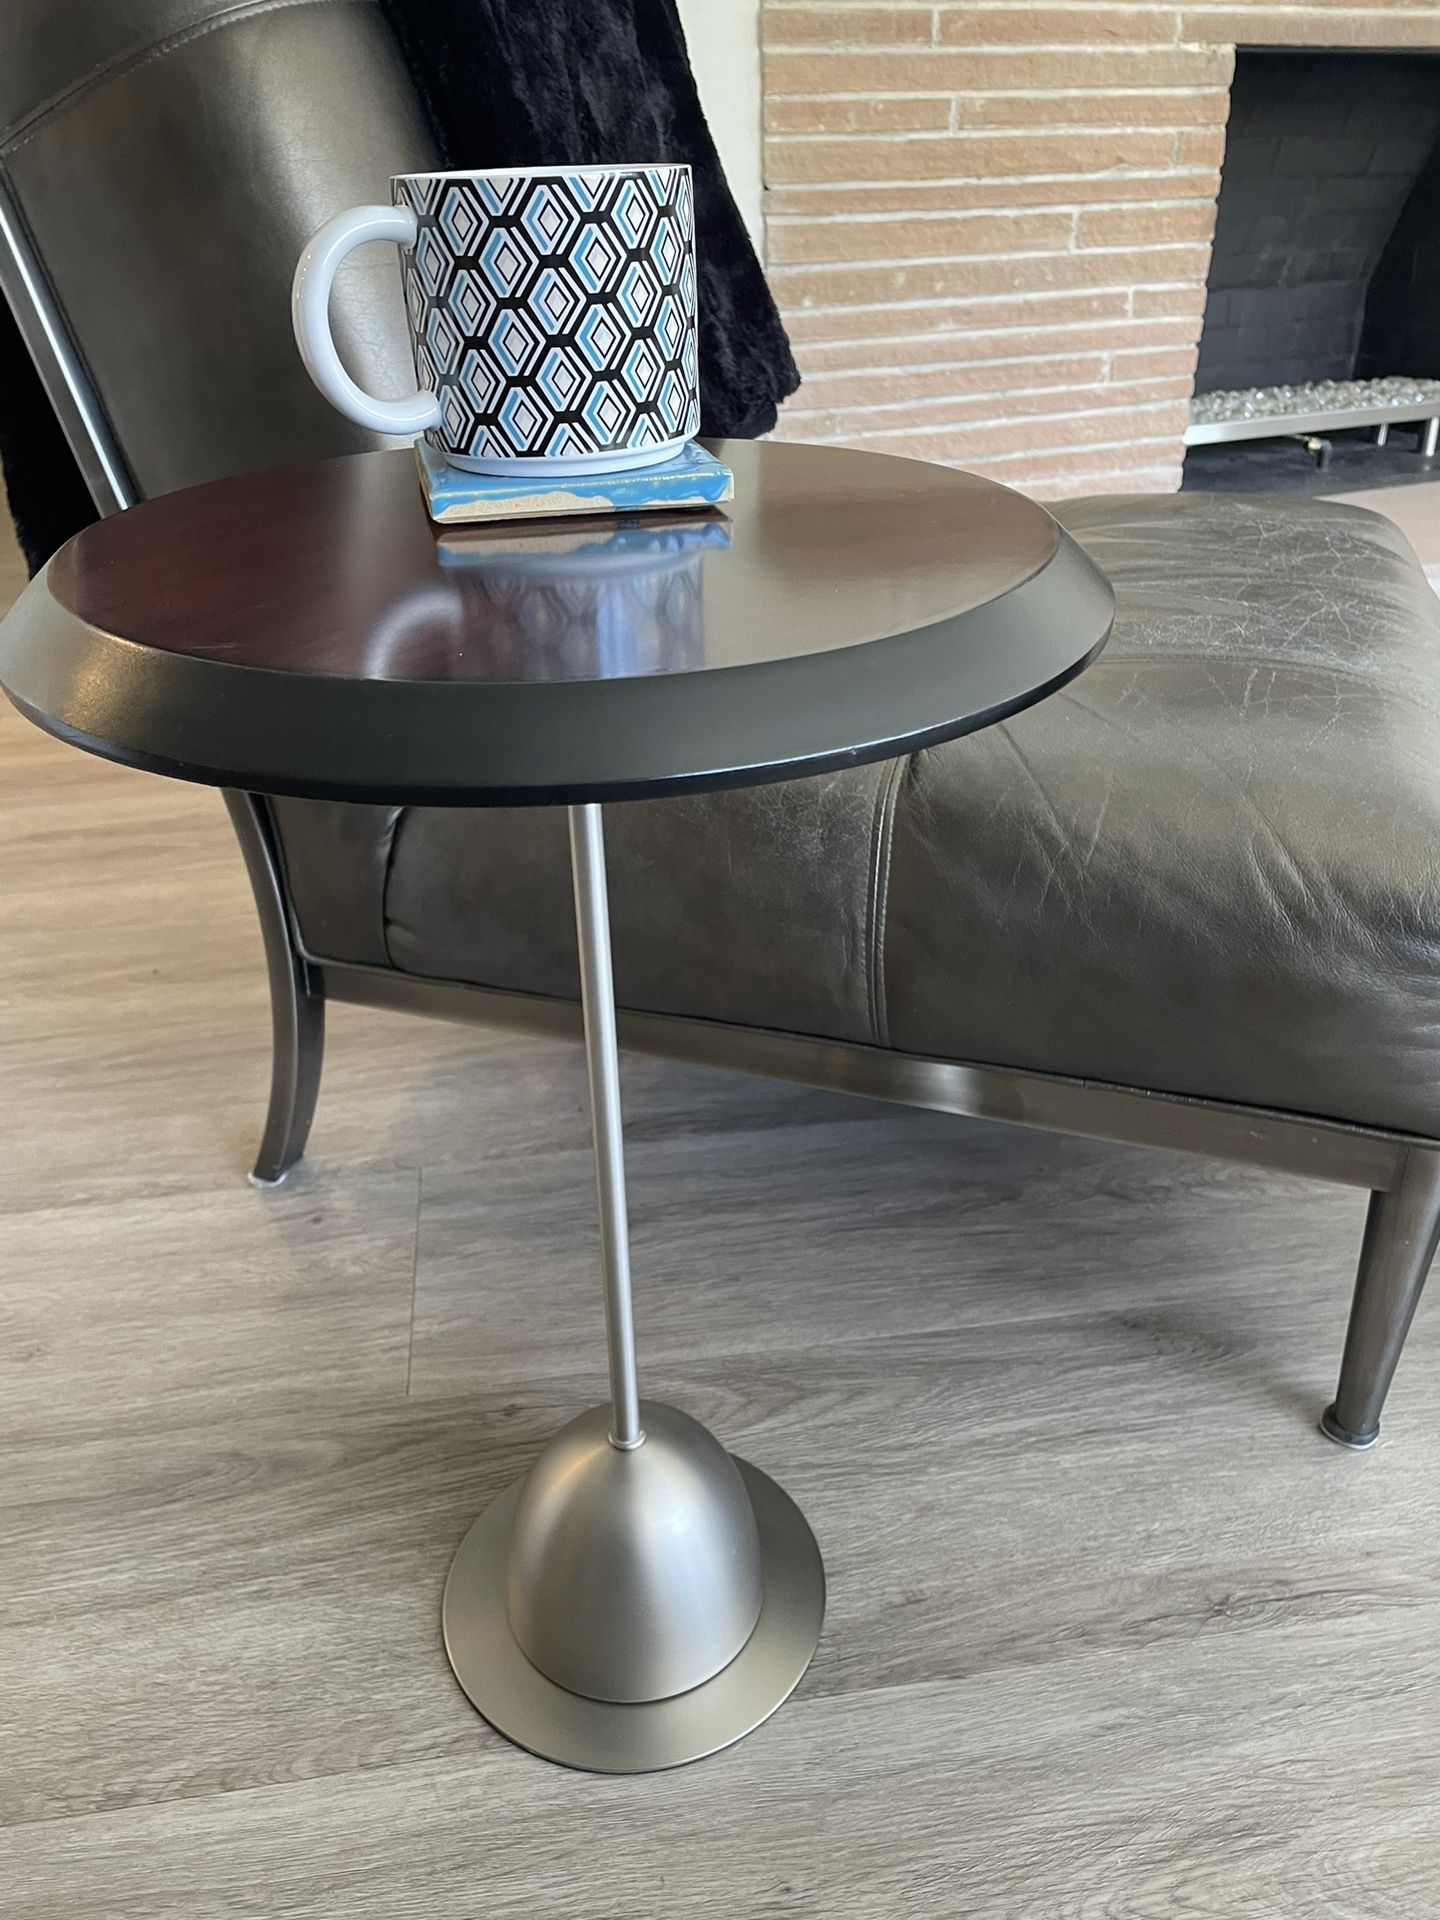 Round wood and metal side table 14 inches by 21.5 inches Tall